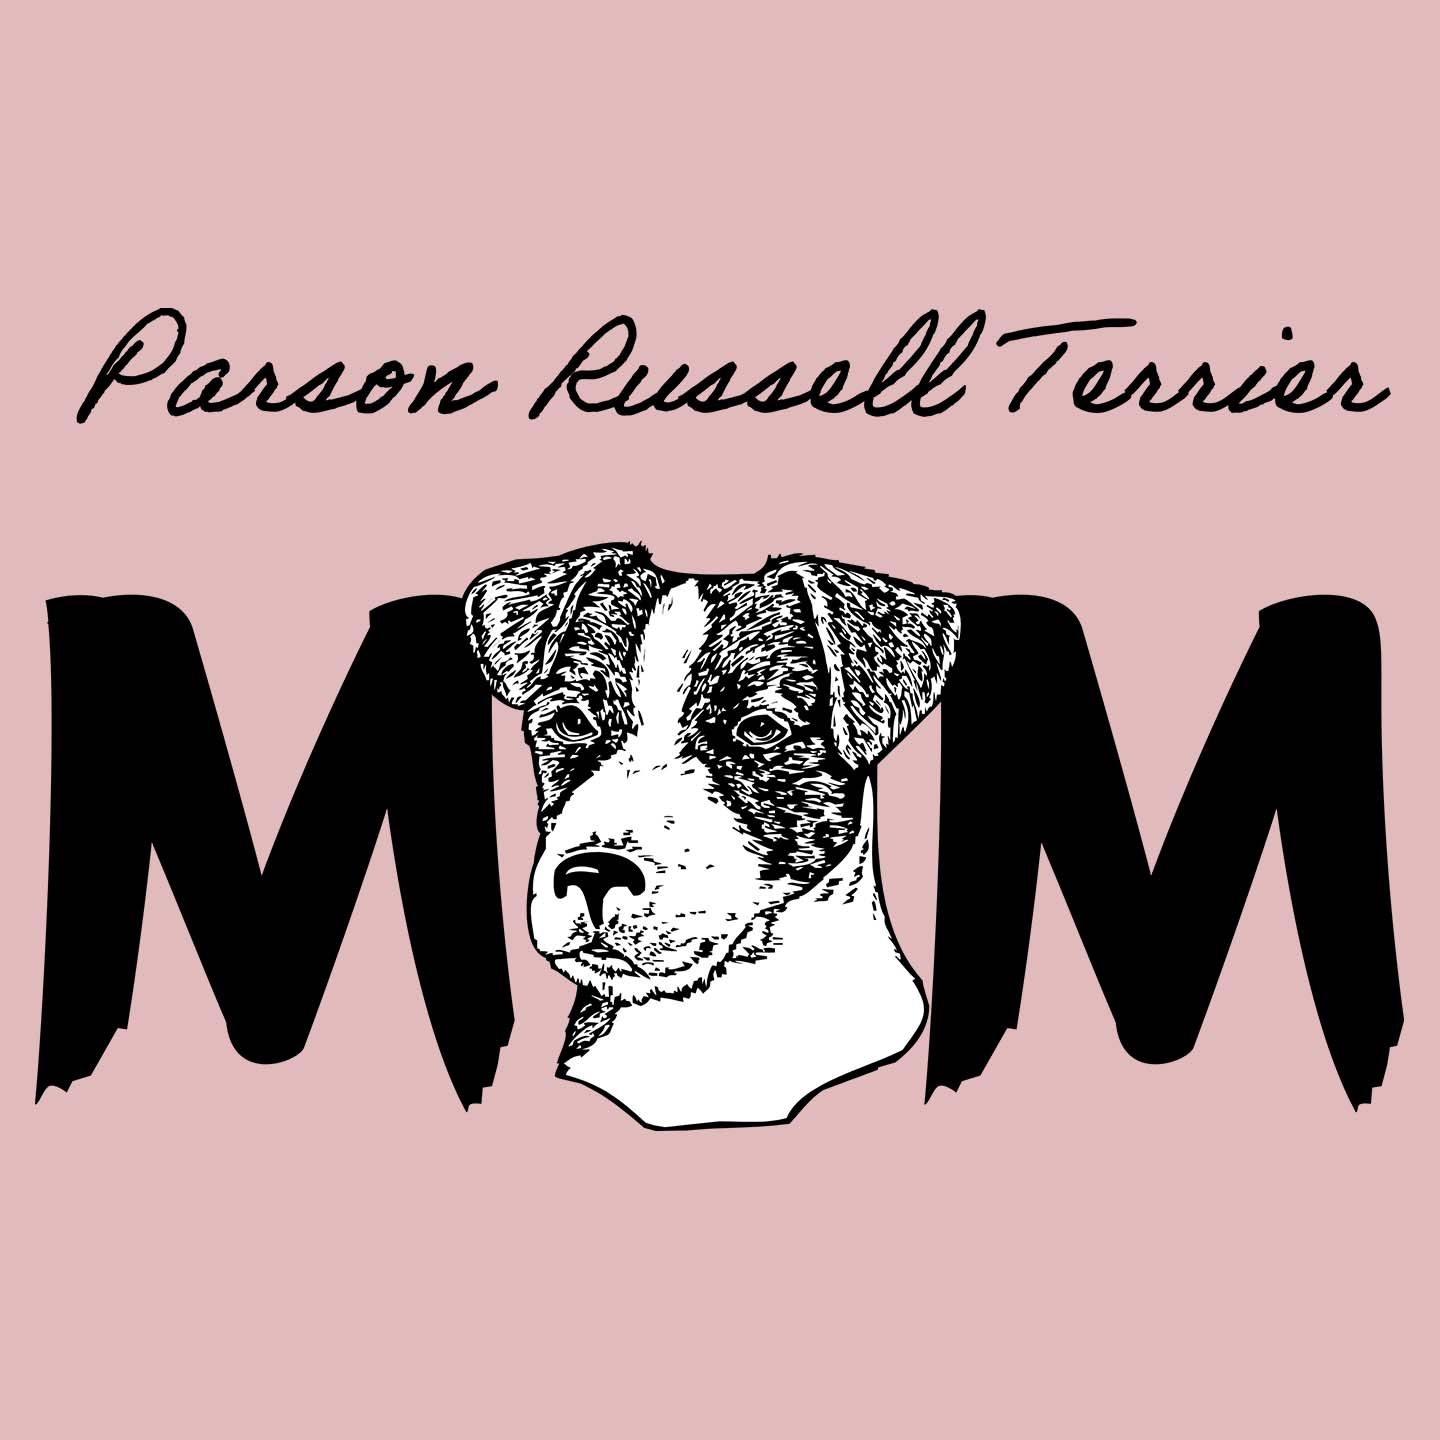 Parson Russell Terrier Breed Mom - Women's Fitted T-Shirt